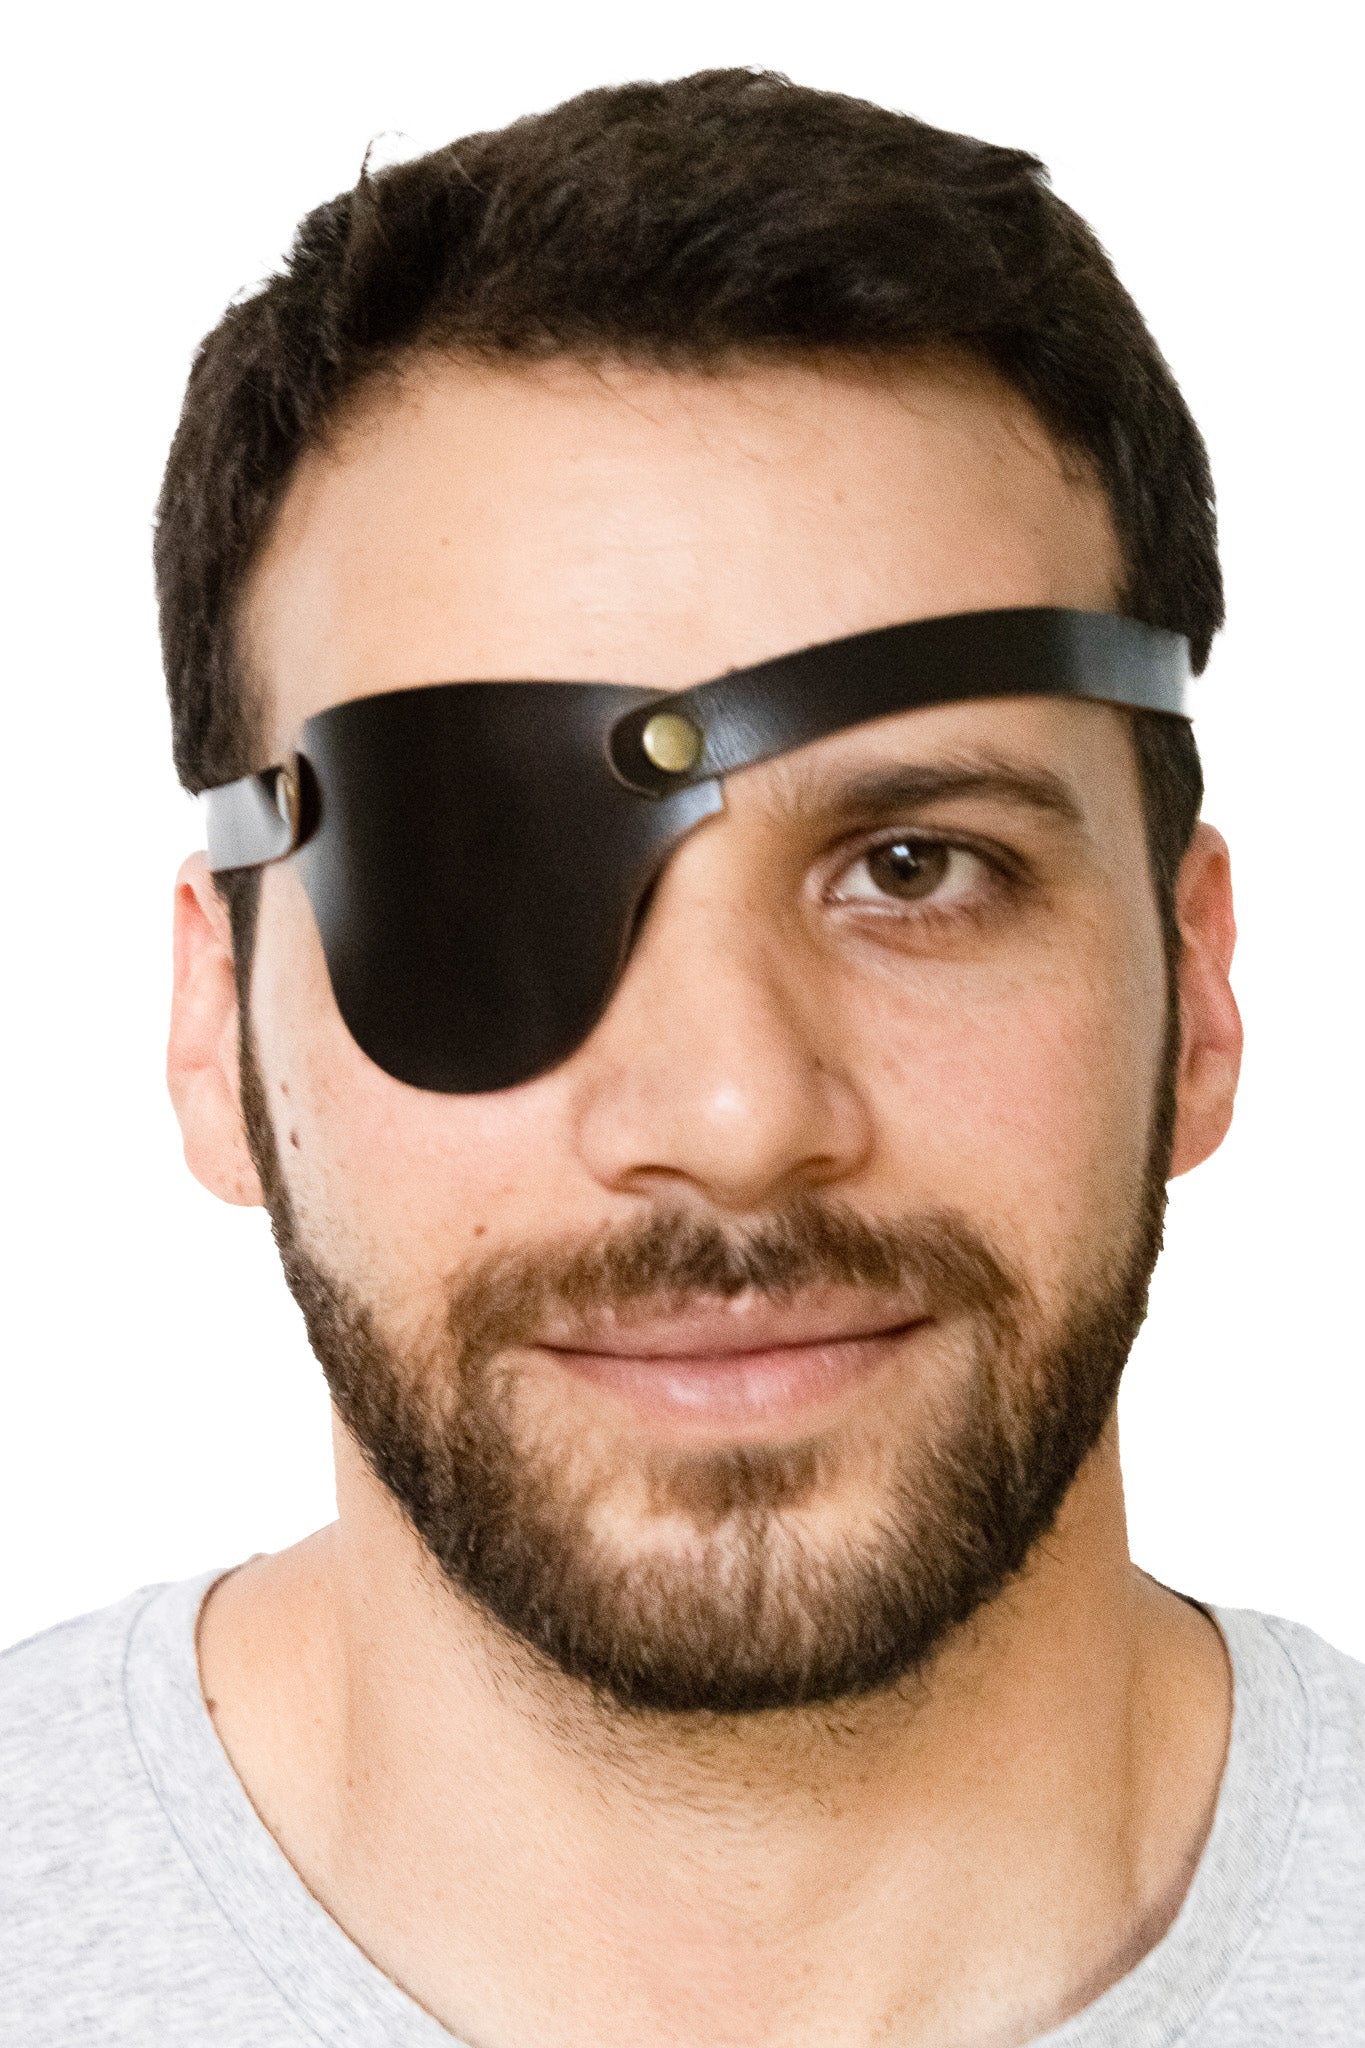 Andean Leather - Leather Eye Patch, Eye Patches for Adults, Pirate Eye Patch, Medical Eye Patch for Right and Left Eye